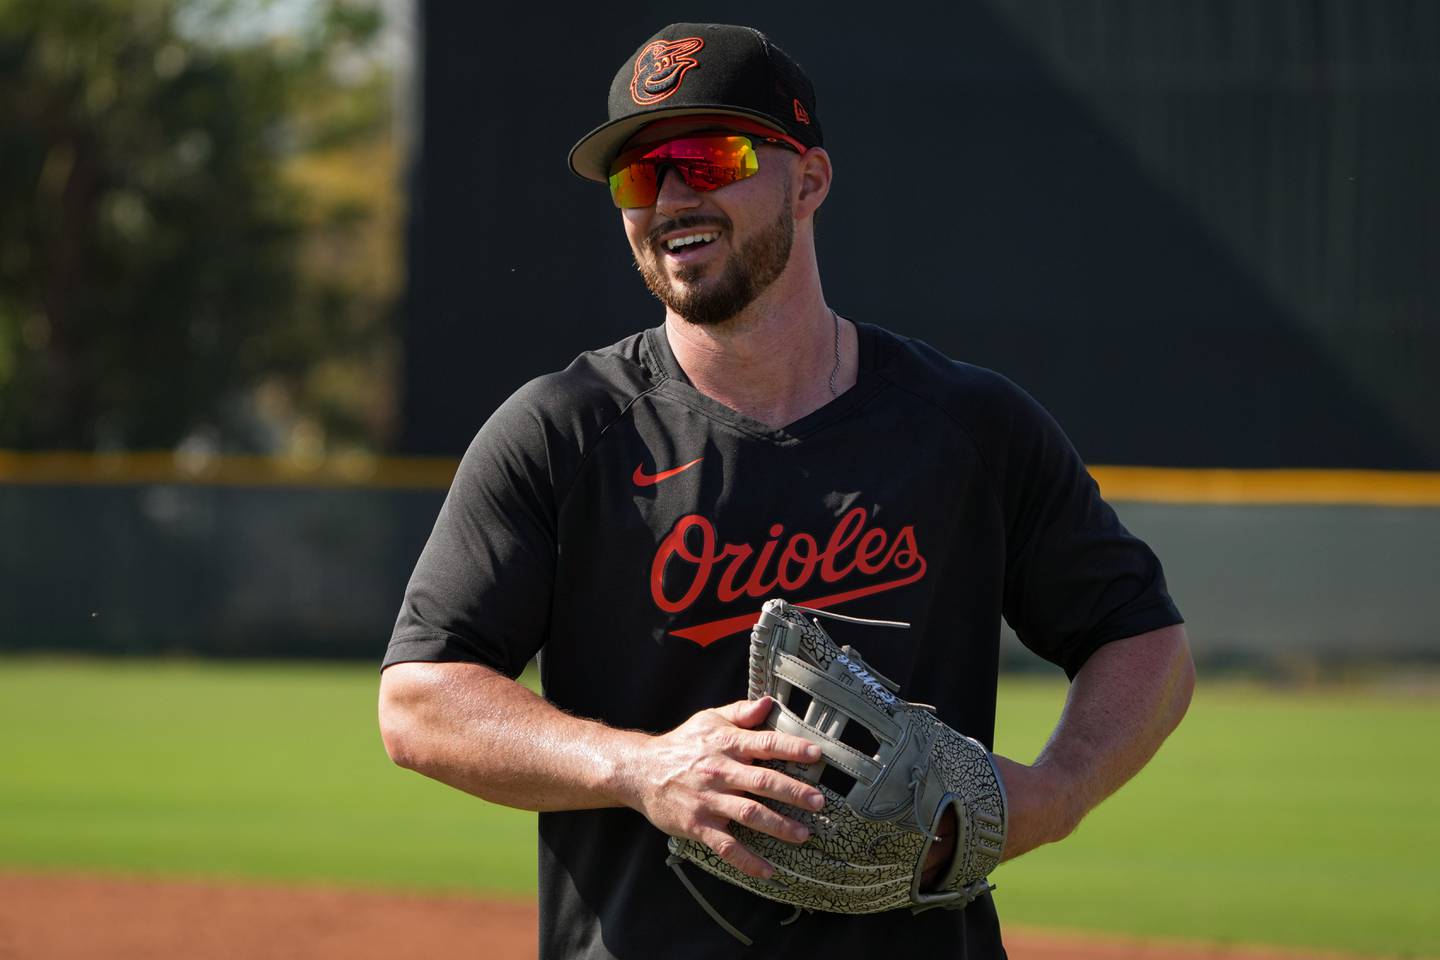 Ryan McKenna (26) reacts to a teammate’s joke during batting practice at Ed Smith Stadium in Sarasota on 2/24/23. The Baltimore Orioles’ Spring Training session runs from mid-February through the end of March.